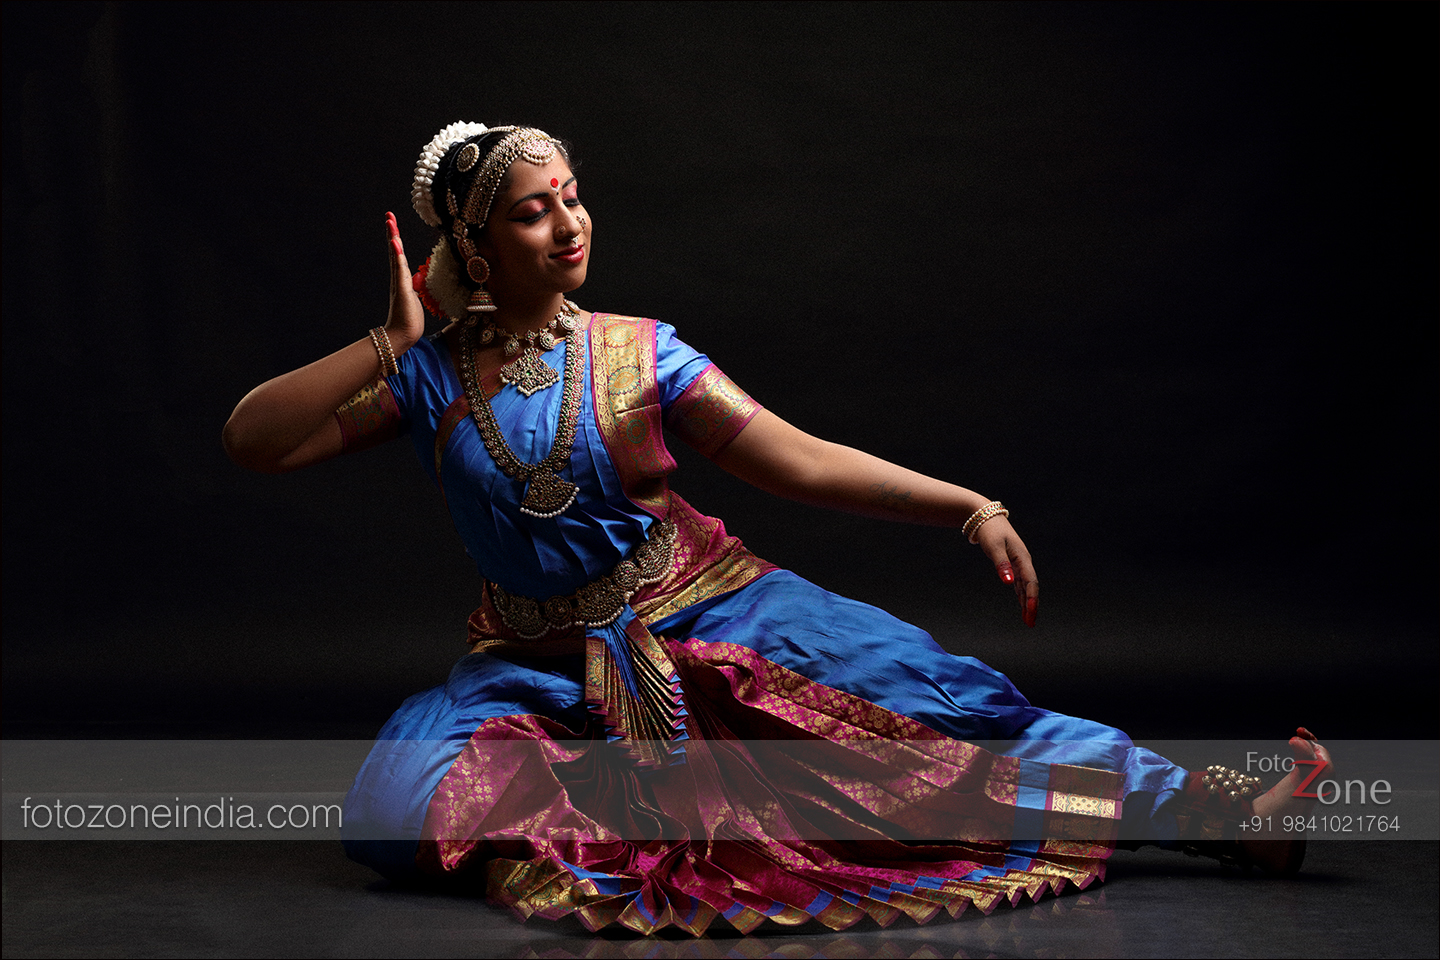 Reflections on canvas reflected in Kathak